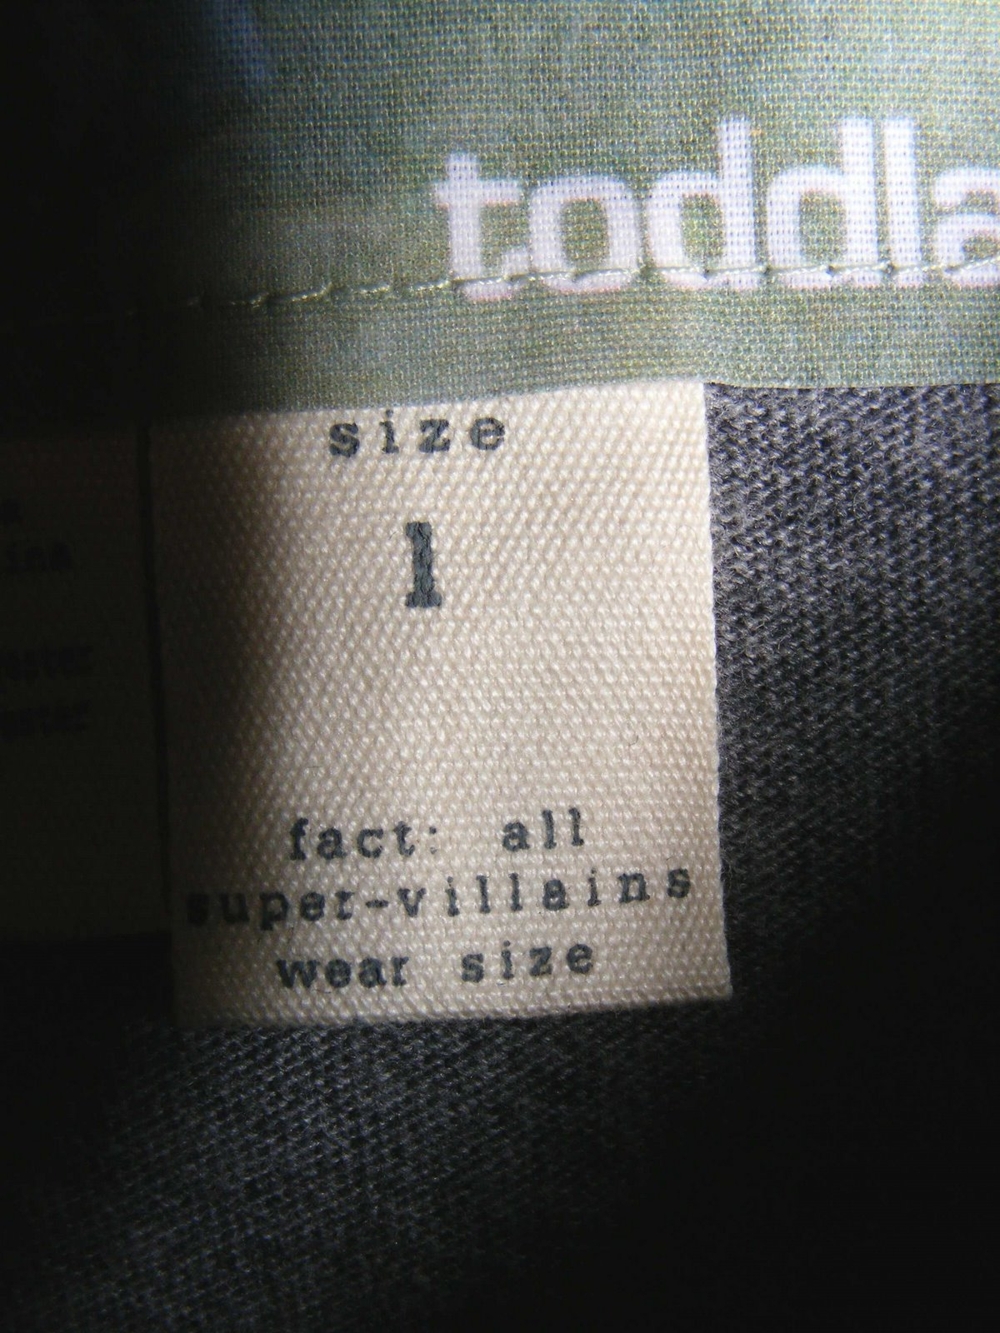 WTF Clothing Tags!